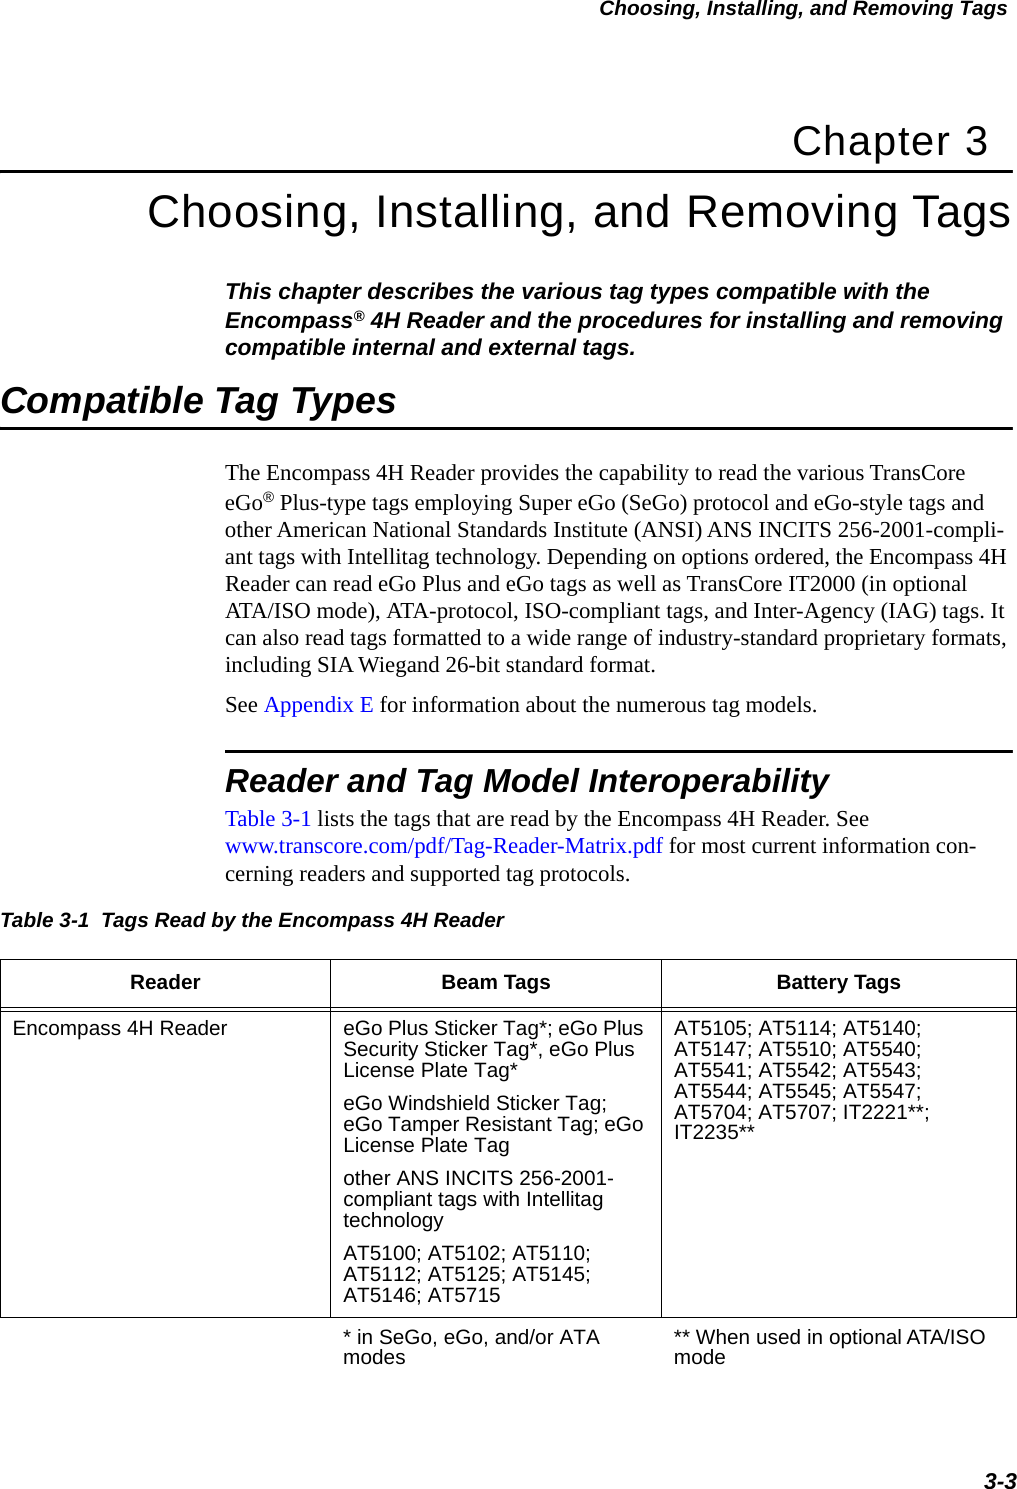 Choosing, Installing, and Removing Tags3-3Chapter 3Choosing, Installing, and Removing TagsThis chapter describes the various tag types compatible with the Encompass® 4H Reader and the procedures for installing and removing compatible internal and external tags. Compatible Tag TypesThe Encompass 4H Reader provides the capability to read the various TransCore eGo® Plus-type tags employing Super eGo (SeGo) protocol and eGo-style tags and other American National Standards Institute (ANSI) ANS INCITS 256-2001-compli-ant tags with Intellitag technology. Depending on options ordered, the Encompass 4H Reader can read eGo Plus and eGo tags as well as TransCore IT2000 (in optional ATA/ISO mode), ATA-protocol, ISO-compliant tags, and Inter-Agency (IAG) tags. It can also read tags formatted to a wide range of industry-standard proprietary formats, including SIA Wiegand 26-bit standard format.See Appendix E for information about the numerous tag models.Reader and Tag Model InteroperabilityTable 3-1 lists the tags that are read by the Encompass 4H Reader. See www.transcore.com/pdf/Tag-Reader-Matrix.pdf for most current information con-cerning readers and supported tag protocols.Table 3-1  Tags Read by the Encompass 4H ReaderReader Beam Tags Battery TagsEncompass 4H Reader eGo Plus Sticker Tag*; eGo Plus Security Sticker Tag*, eGo Plus License Plate Tag*eGo Windshield Sticker Tag; eGo Tamper Resistant Tag; eGo License Plate Tagother ANS INCITS 256-2001-compliant tags with Intellitag technologyAT5100; AT5102; AT5110; AT5112; AT5125; AT5145; AT5146; AT5715AT5105; AT5114; AT5140; AT5147; AT5510; AT5540; AT5541; AT5542; AT5543; AT5544; AT5545; AT5547; AT5704; AT5707; IT2221**; IT2235*** in SeGo, eGo, and/or ATA modes ** When used in optional ATA/ISO mode